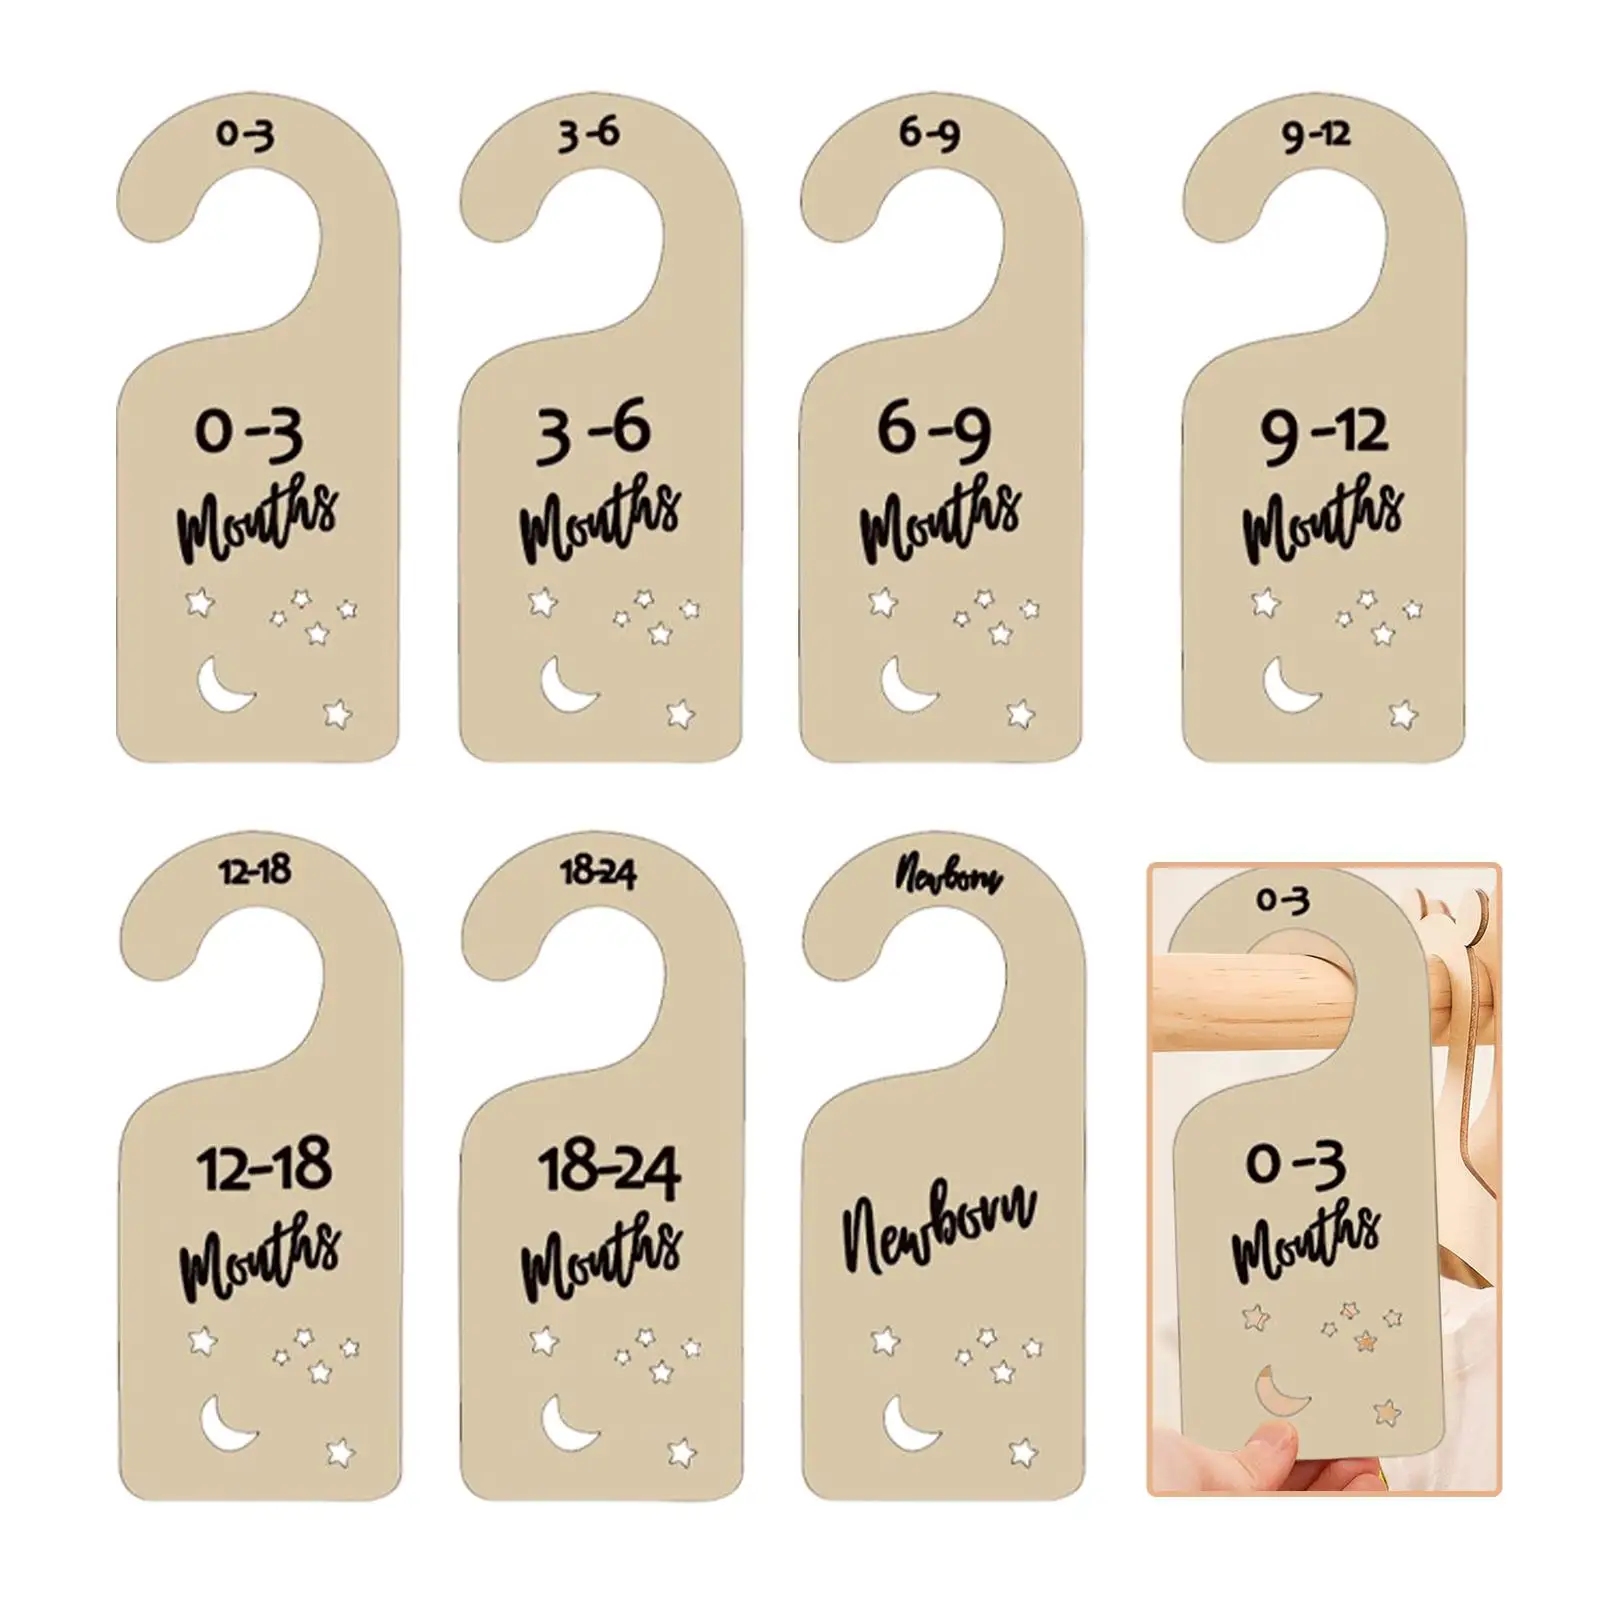 7 Pieces Wooden Baby Clothes Size Hanger Organizer Nursery Decor Clothes Sorting Tags Baby Closet Dividers for Closet Daily Use